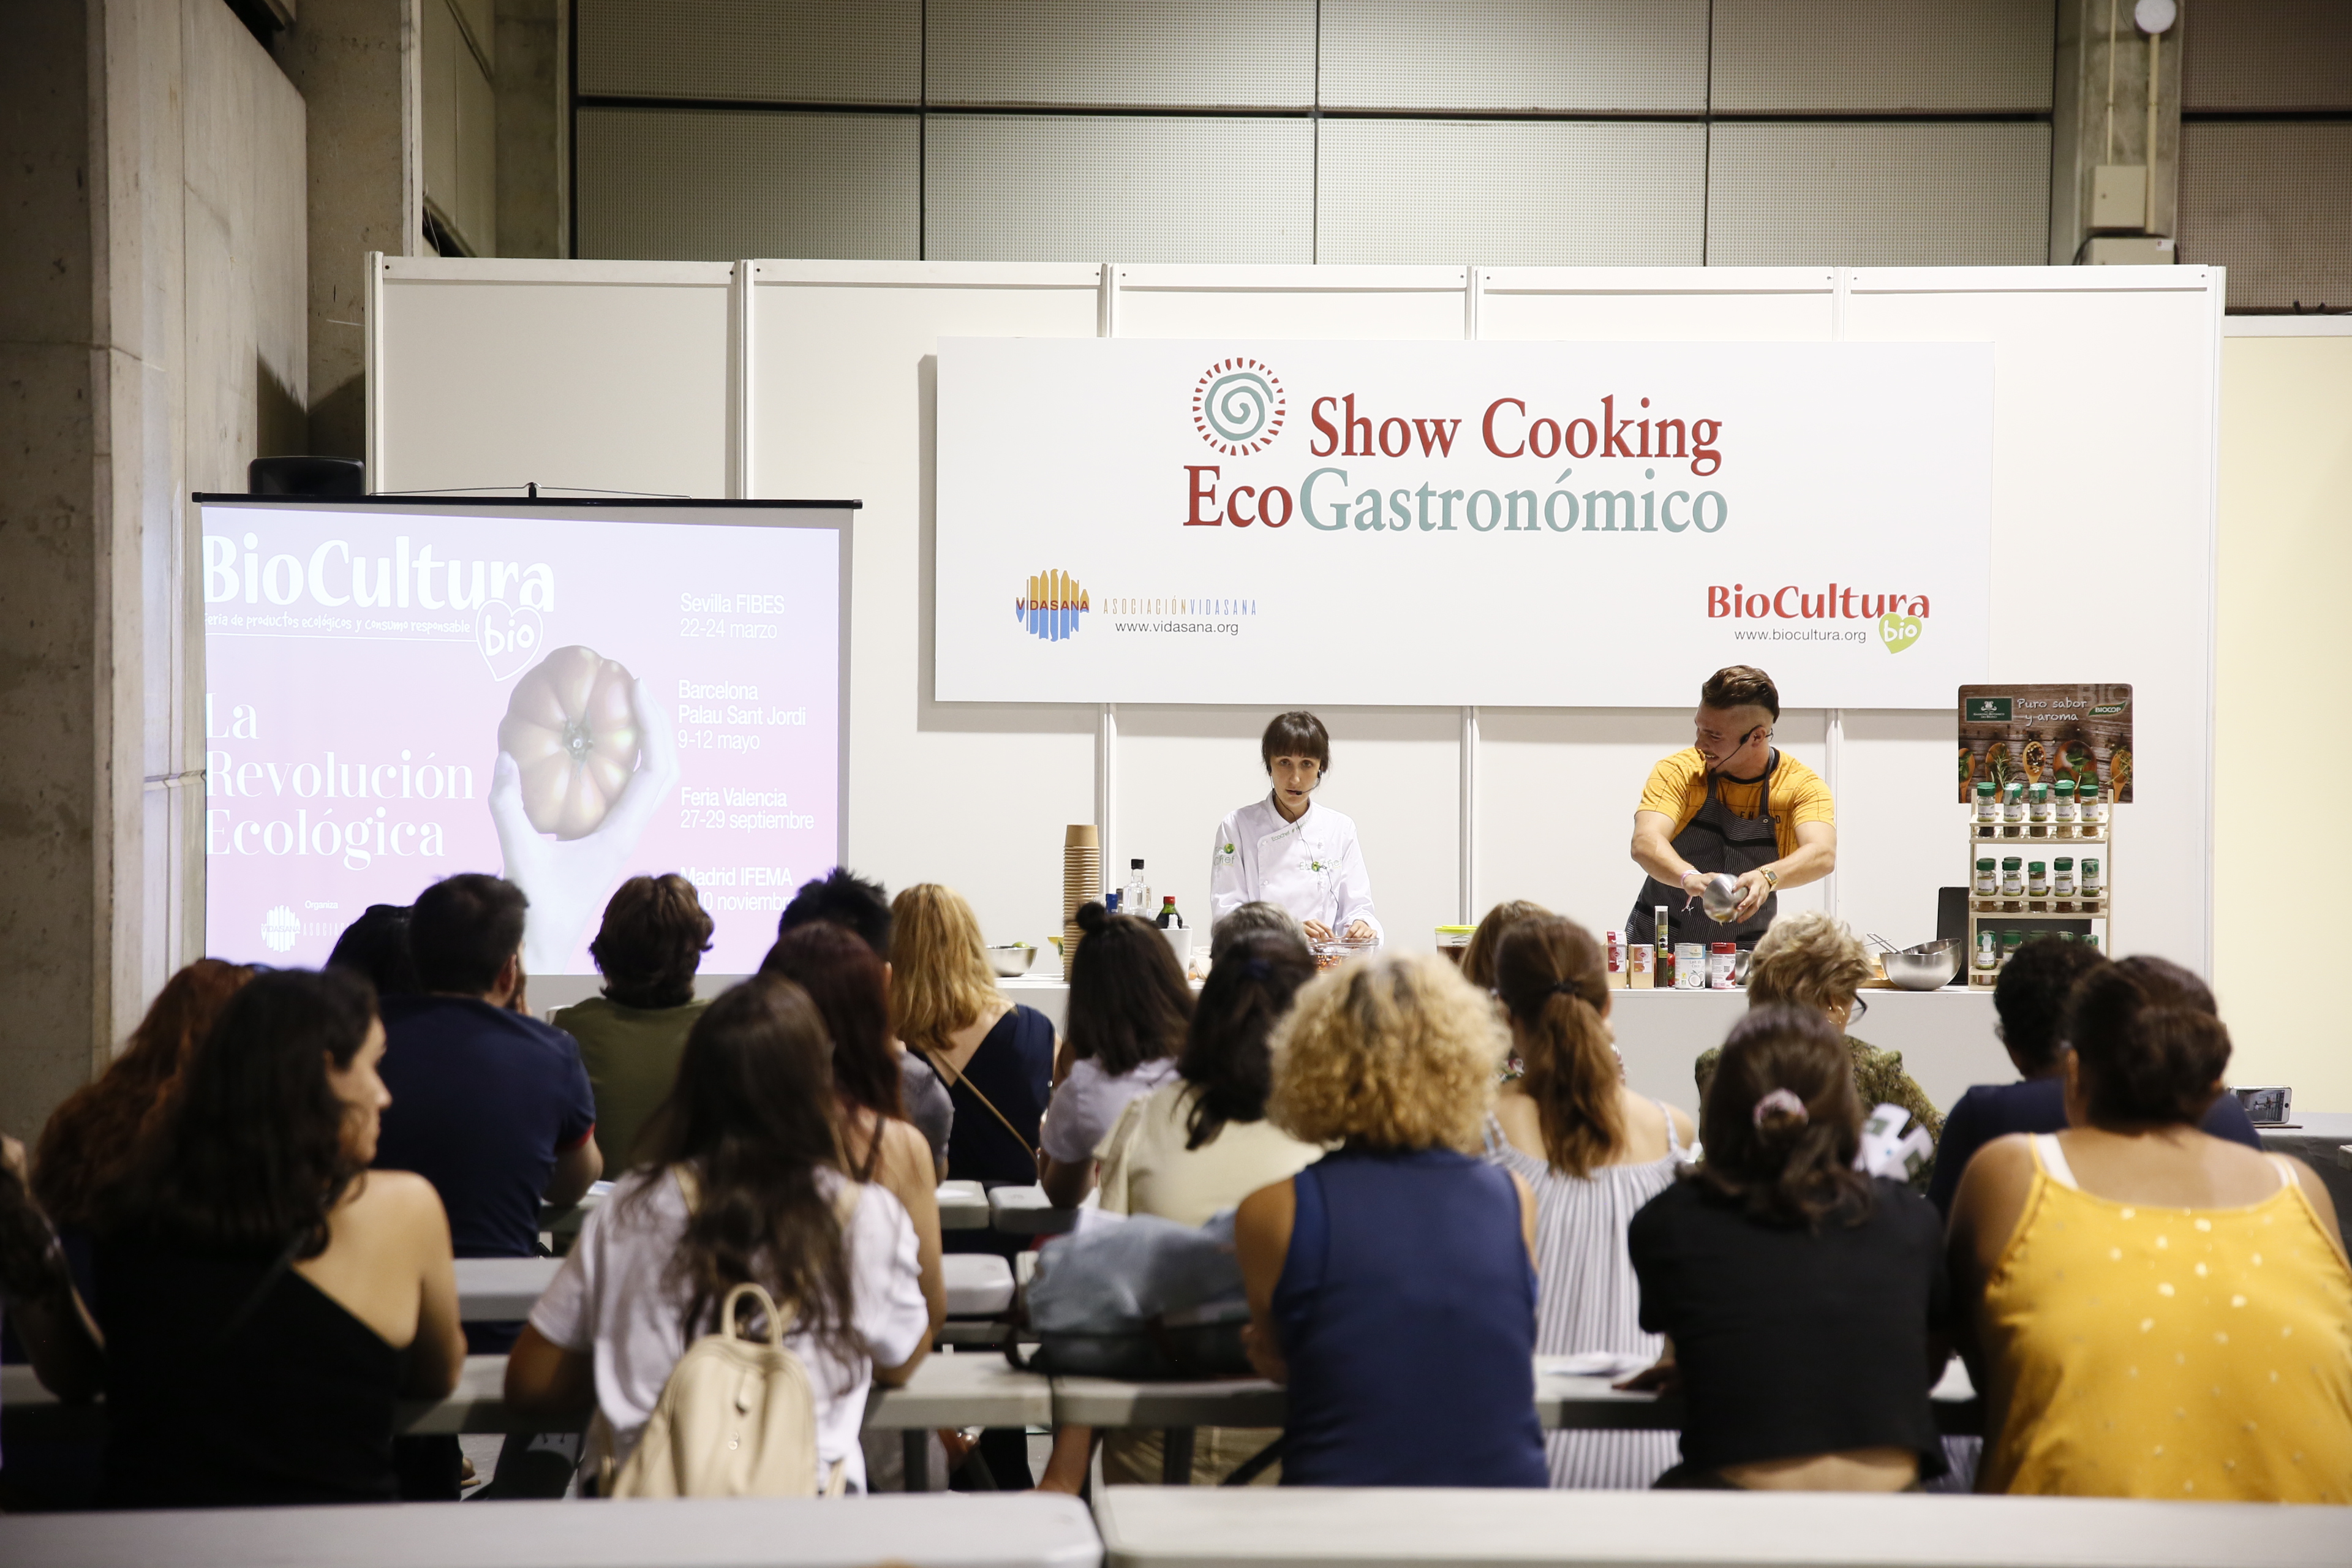 SHOWCOOKING